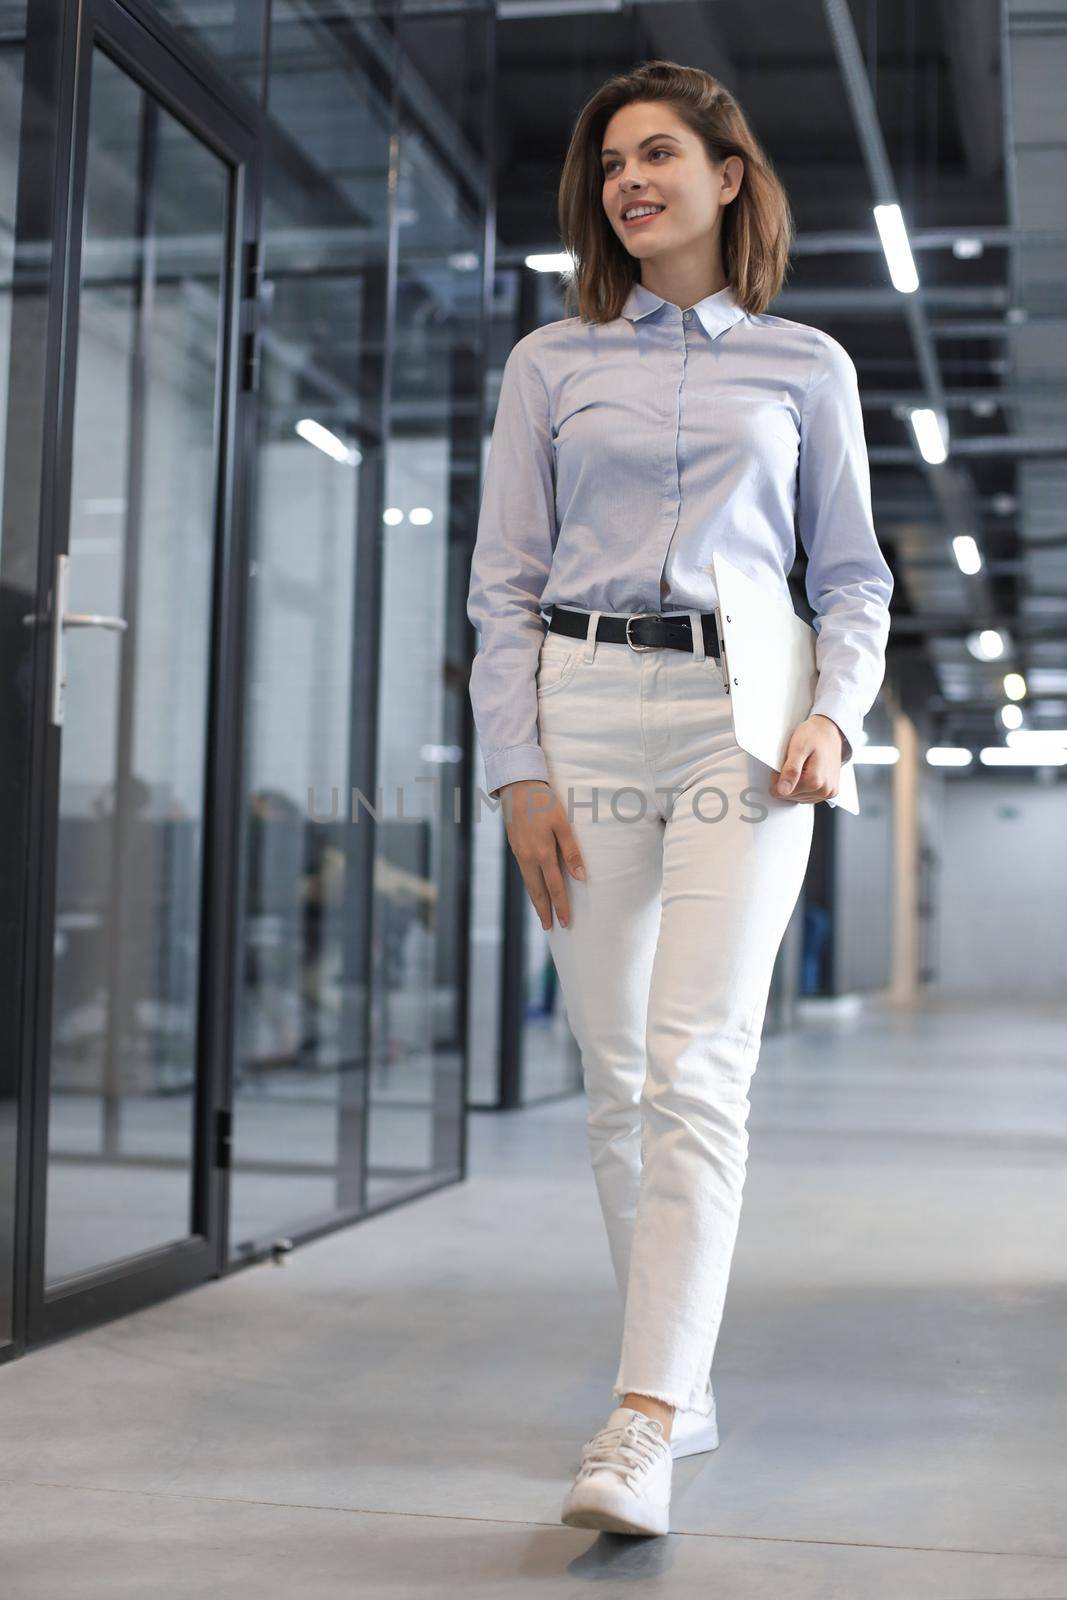 Businesswoman walking along the office corridor with documents